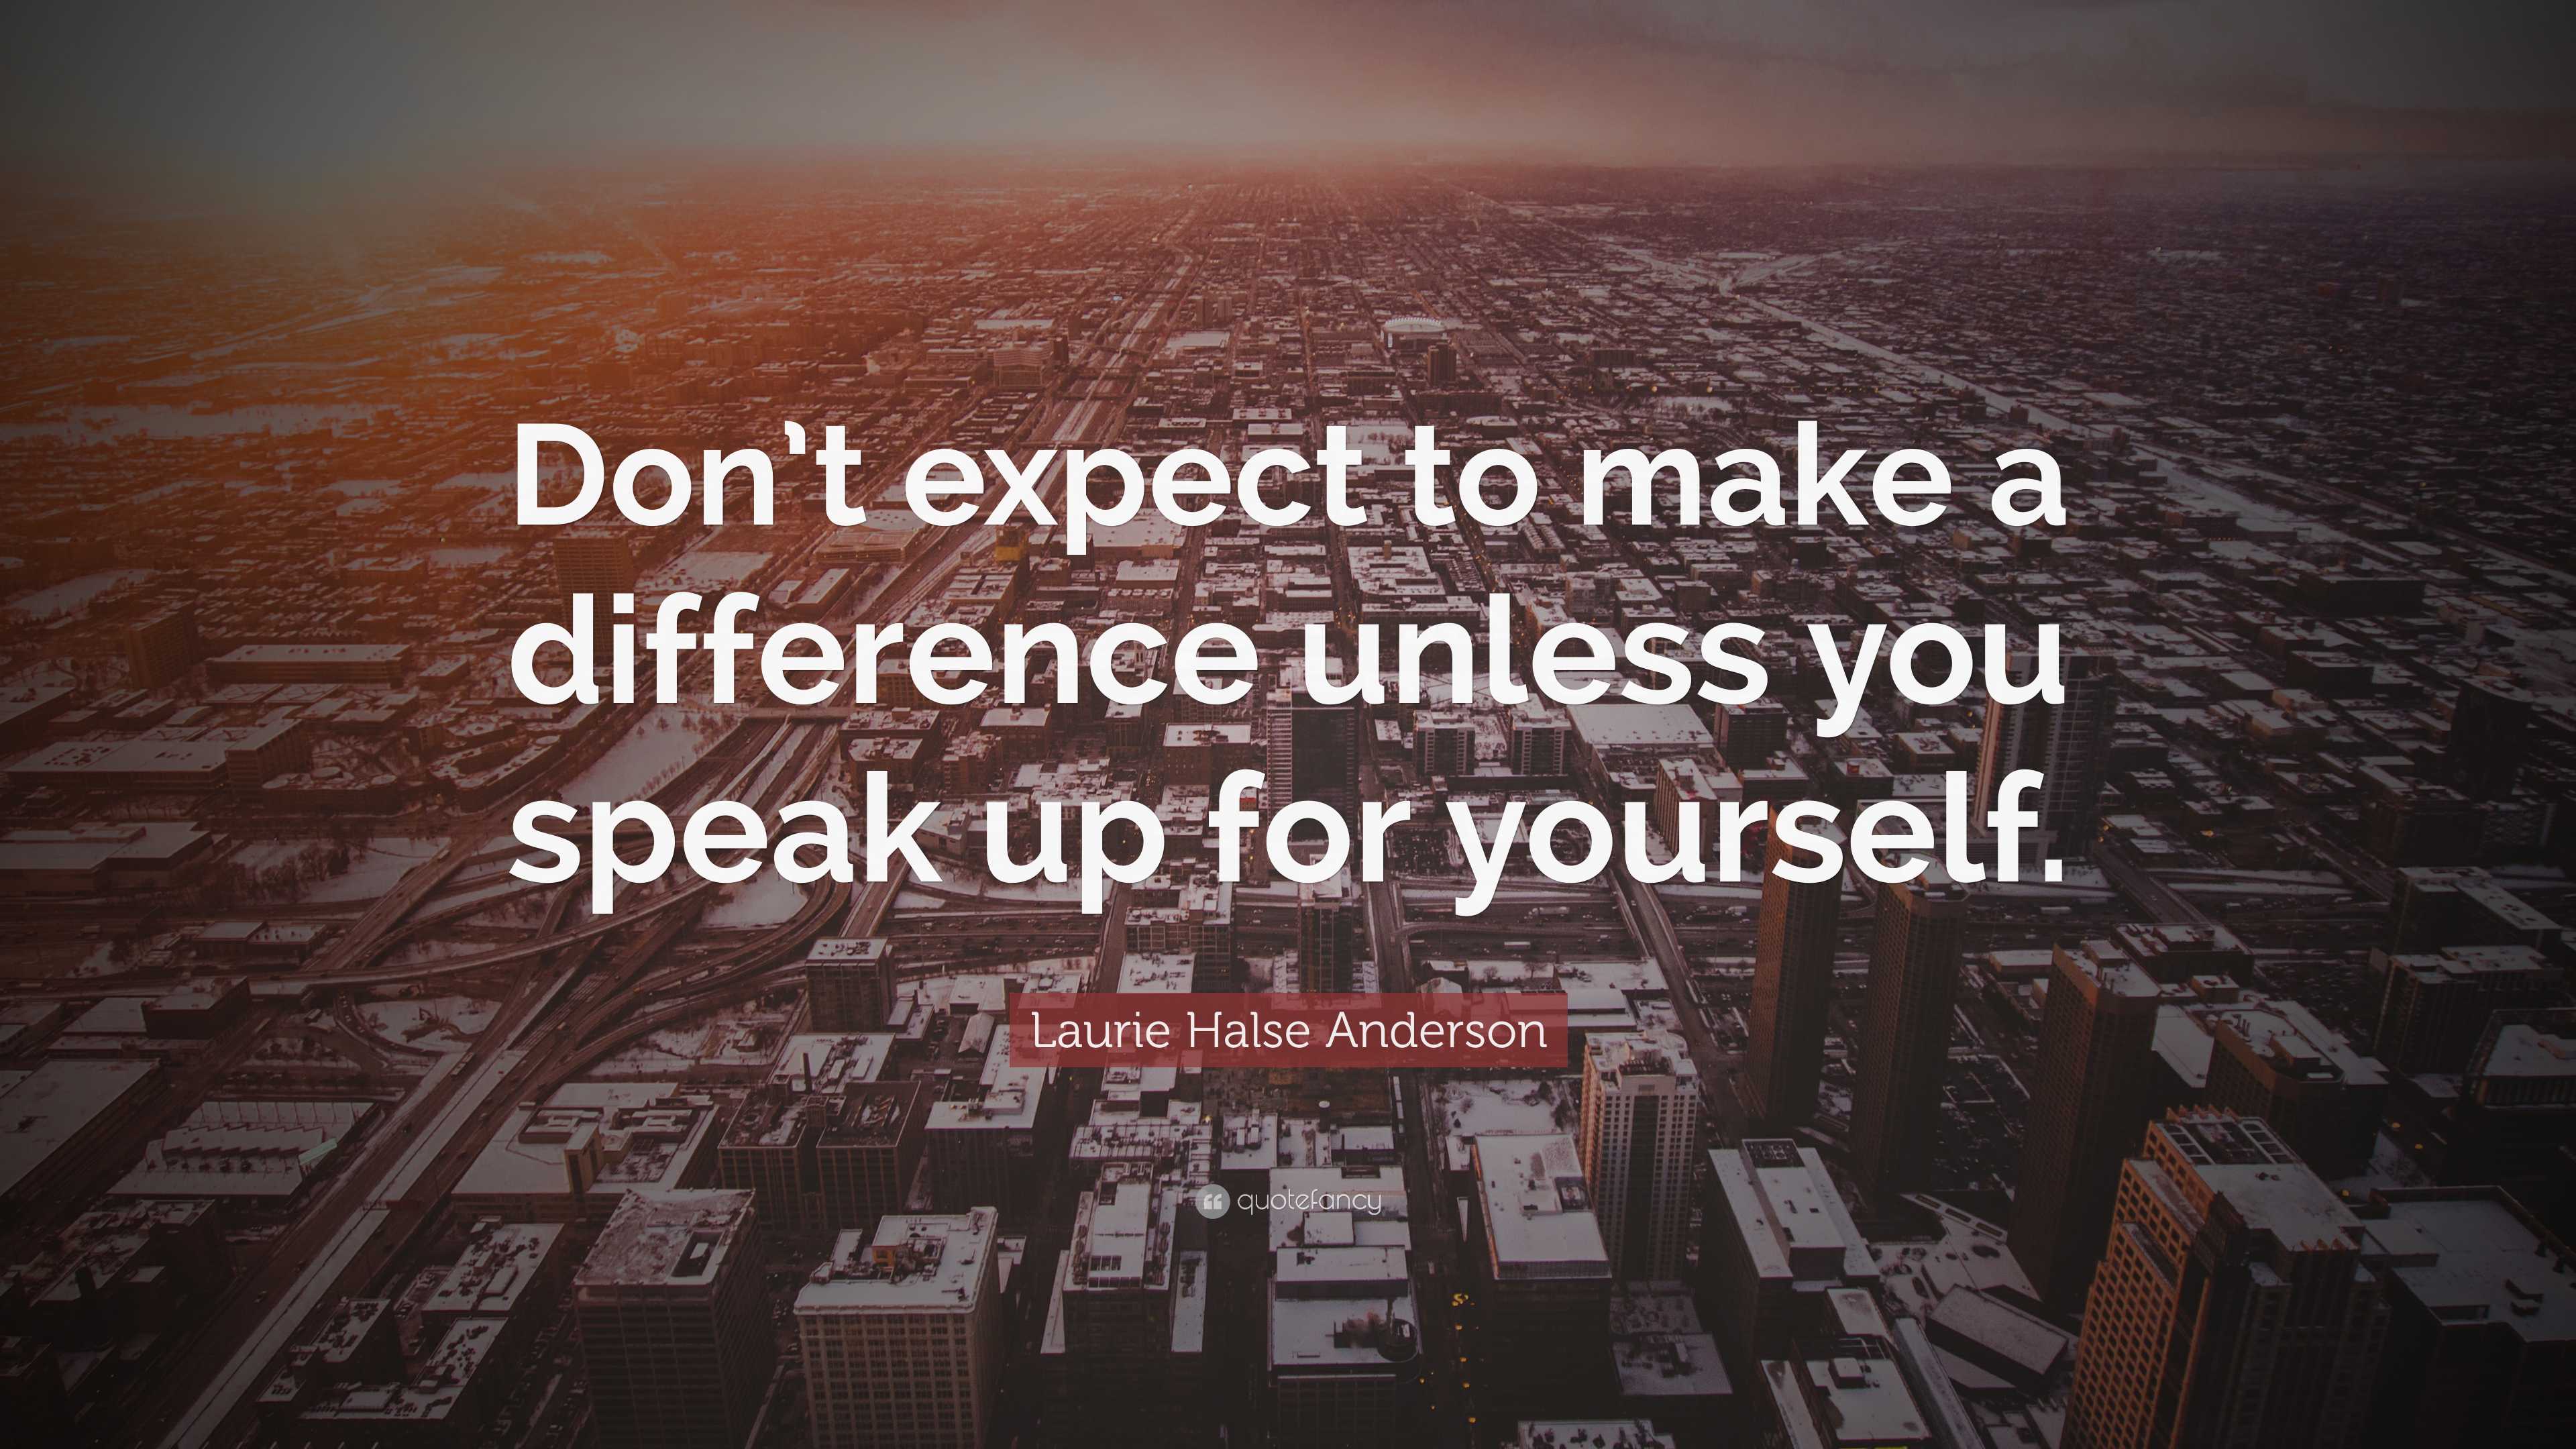 Laurie Halse Anderson Quote: “Don’t expect to make a difference unless ...